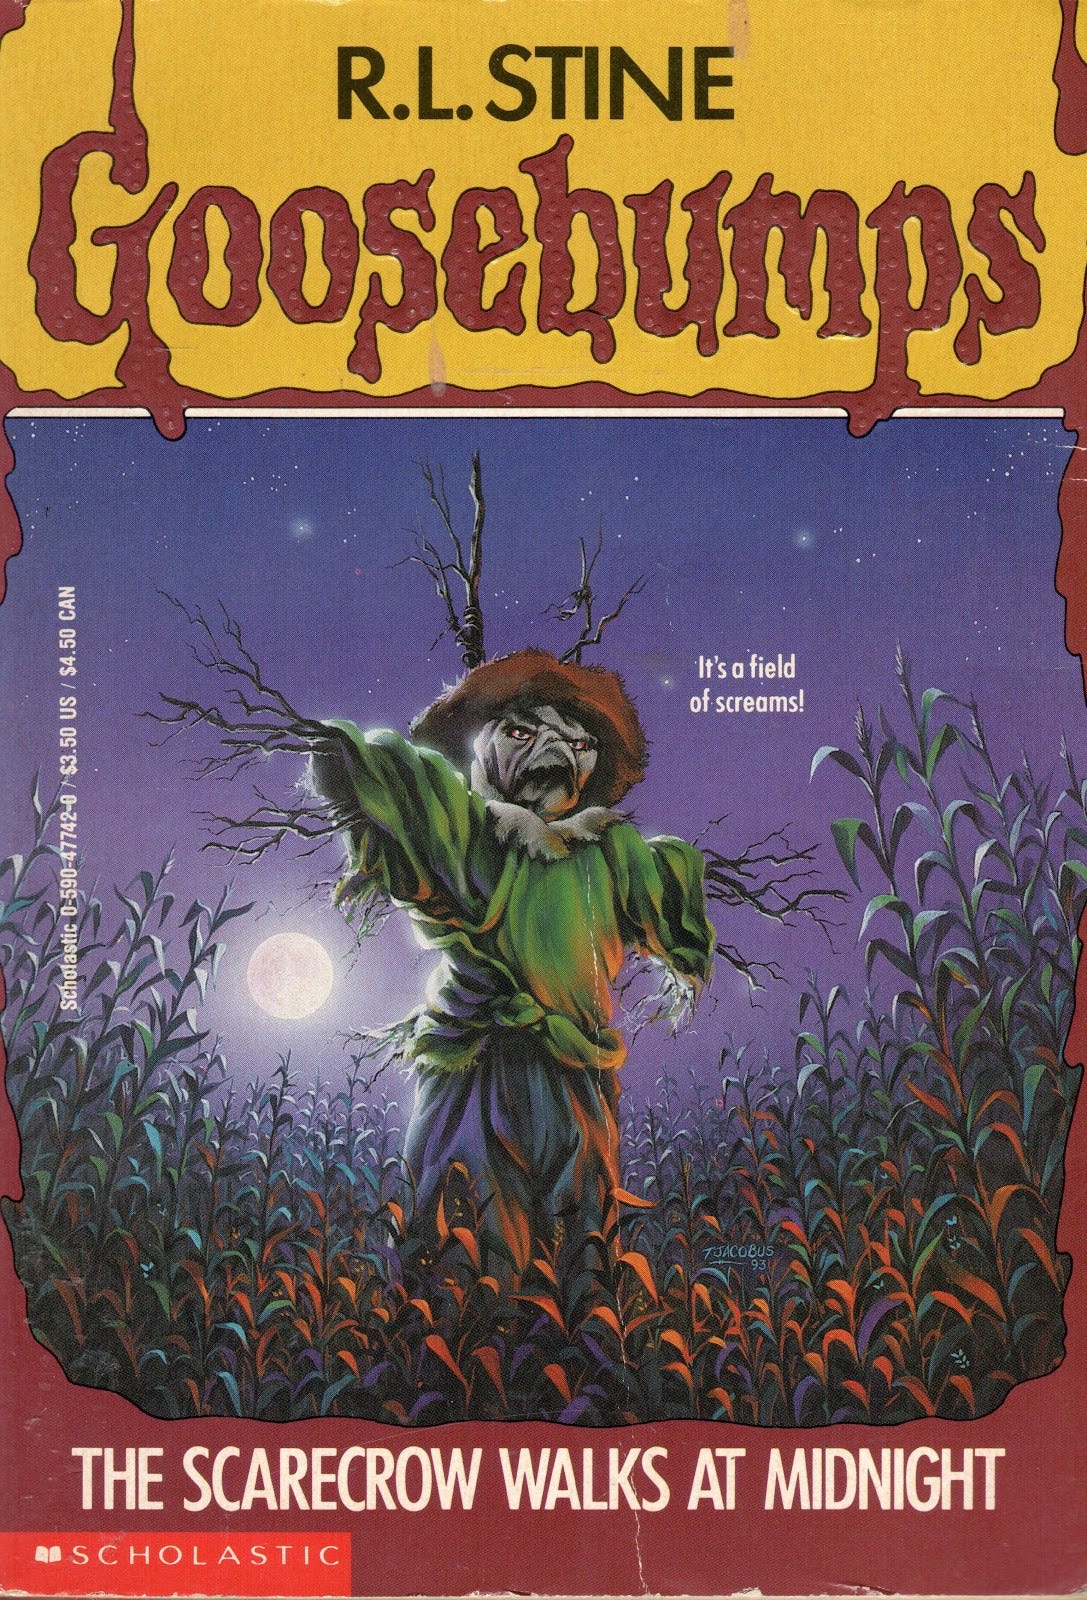 Goosebumps: The Scarecrow Walks at Midnight by R. L. Stine